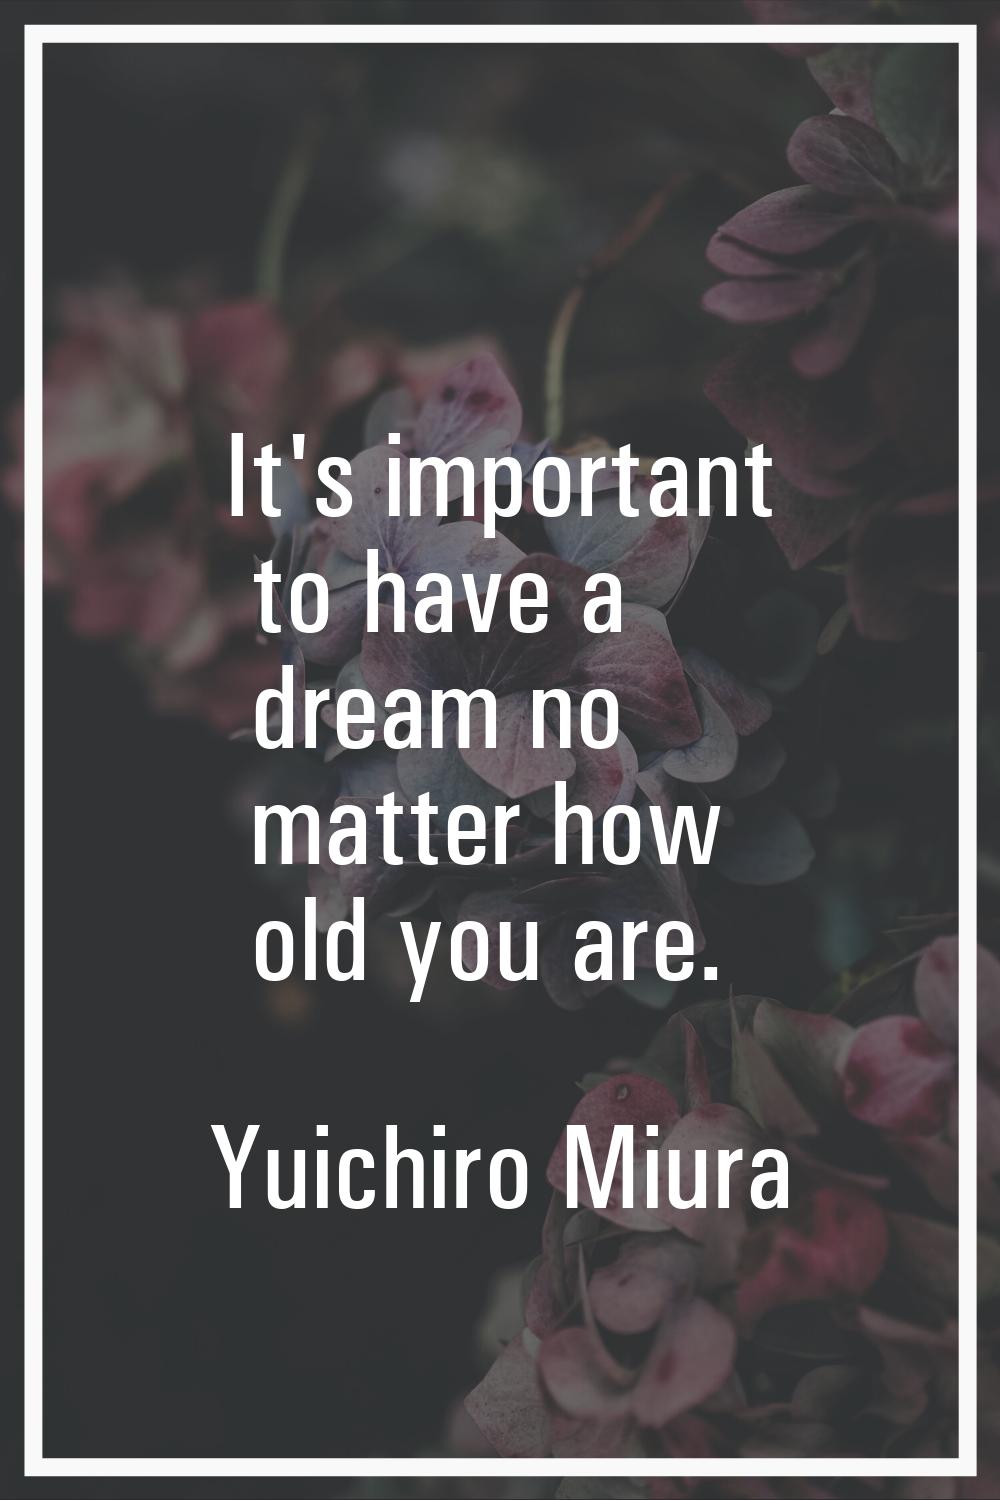 It's important to have a dream no matter how old you are.